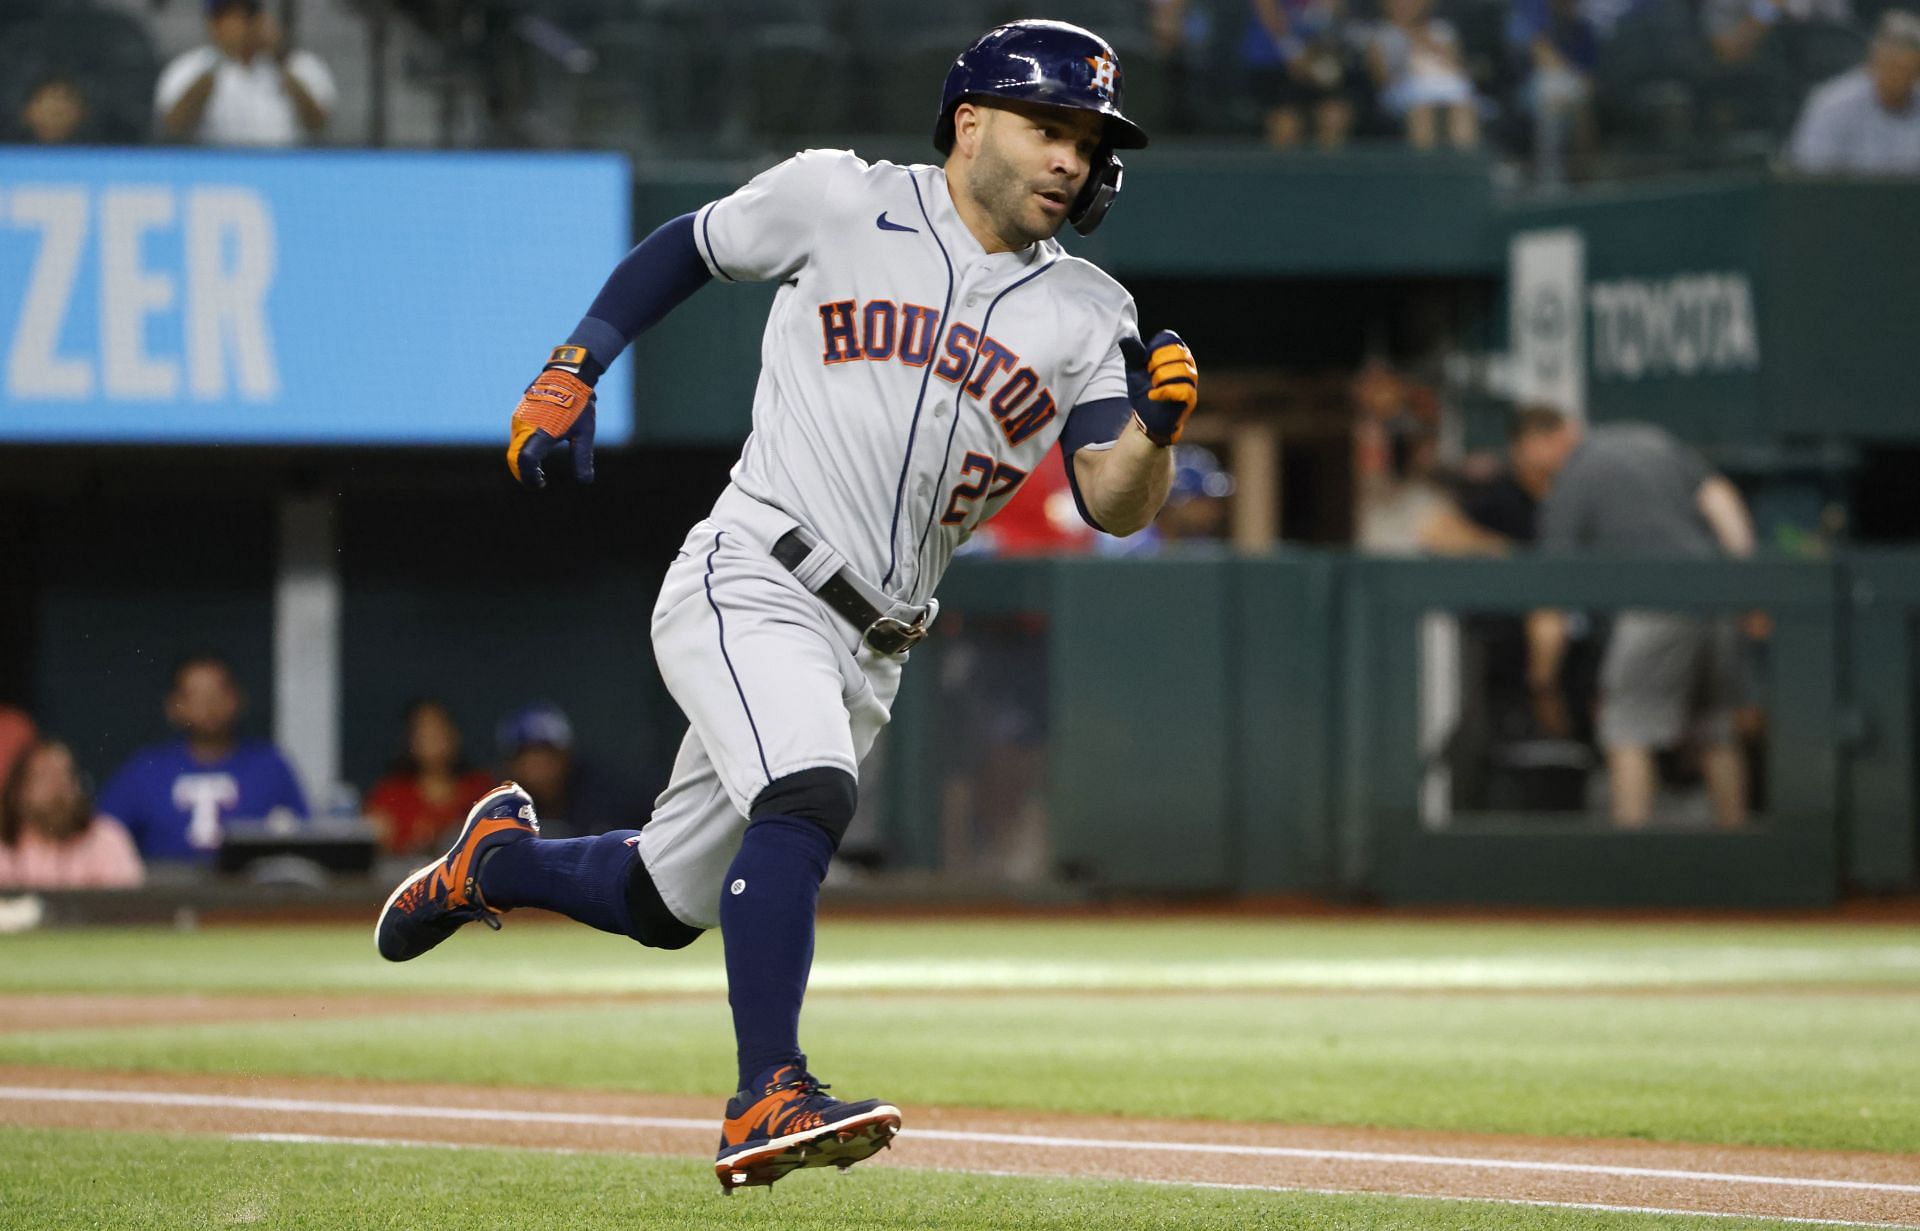 Jose Altuve wants to finish career with Astros